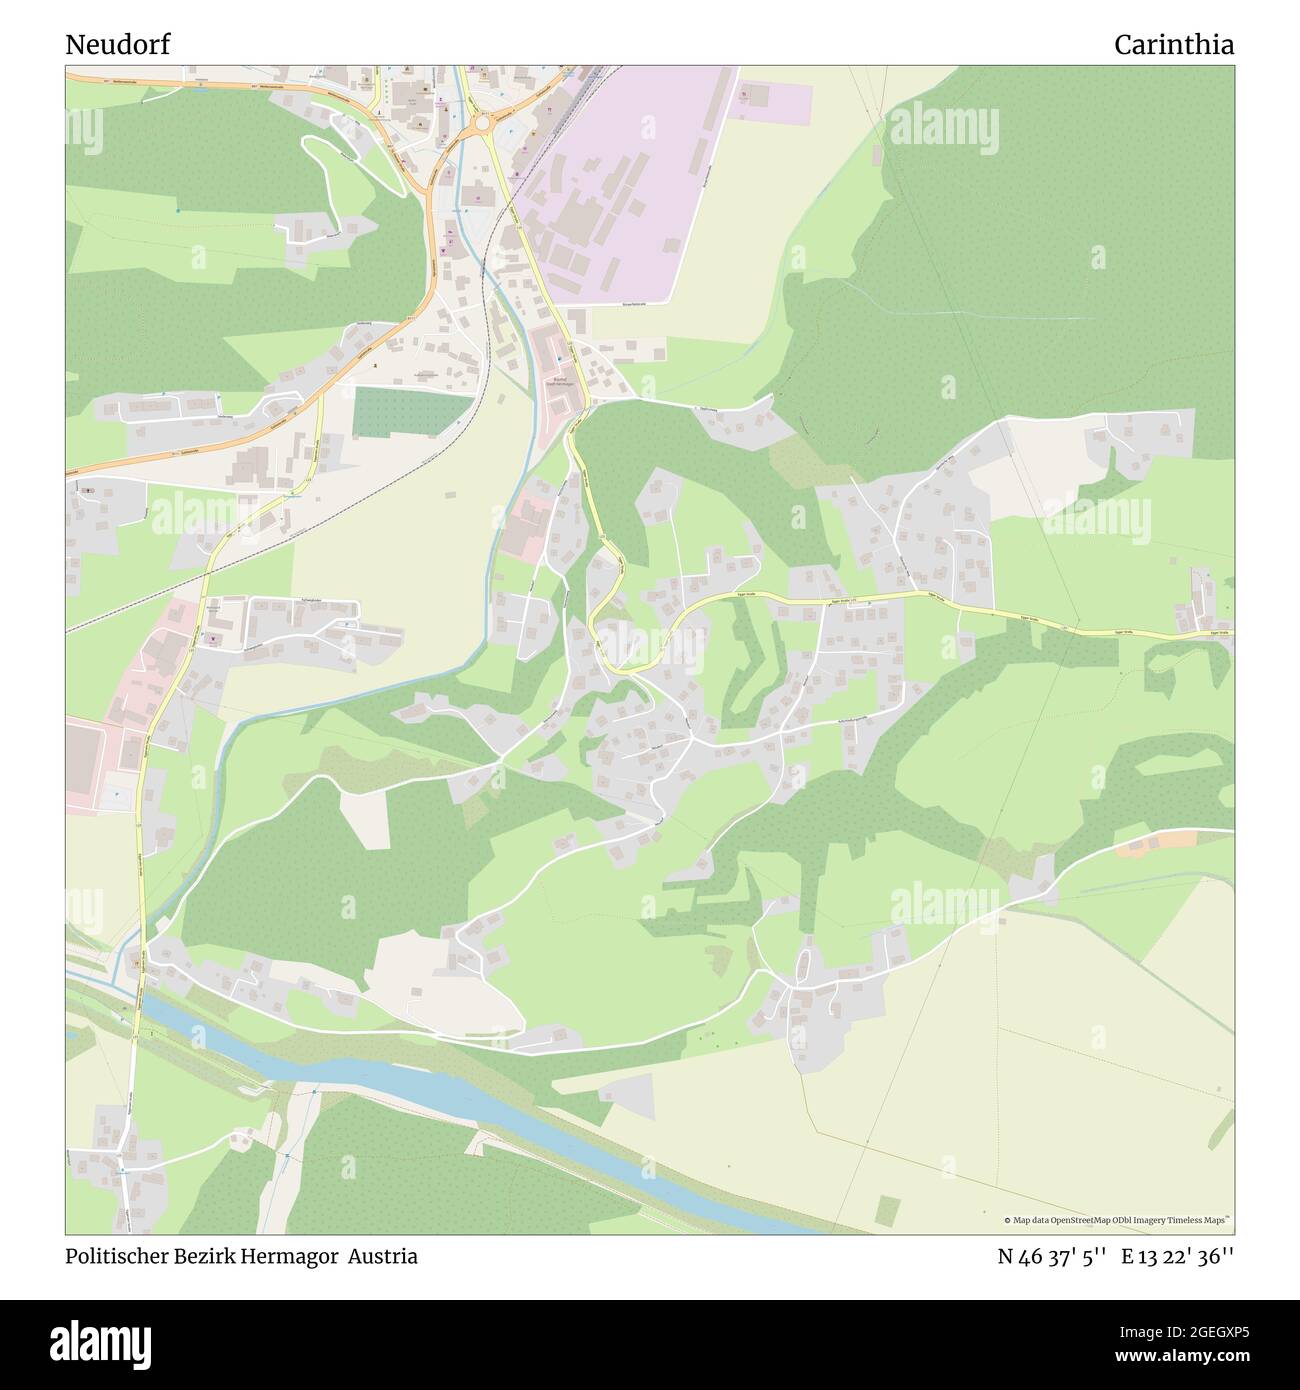 Neudorf, Politischer Bezirk Hermagor, Austria, Carinthia, N 46 37' 5'', E 13 22' 36'', map, Timeless Map published in 2021. Travelers, explorers and adventurers like Florence Nightingale, David Livingstone, Ernest Shackleton, Lewis and Clark and Sherlock Holmes relied on maps to plan travels to the world's most remote corners, Timeless Maps is mapping most locations on the globe, showing the achievement of great dreams Stock Photo